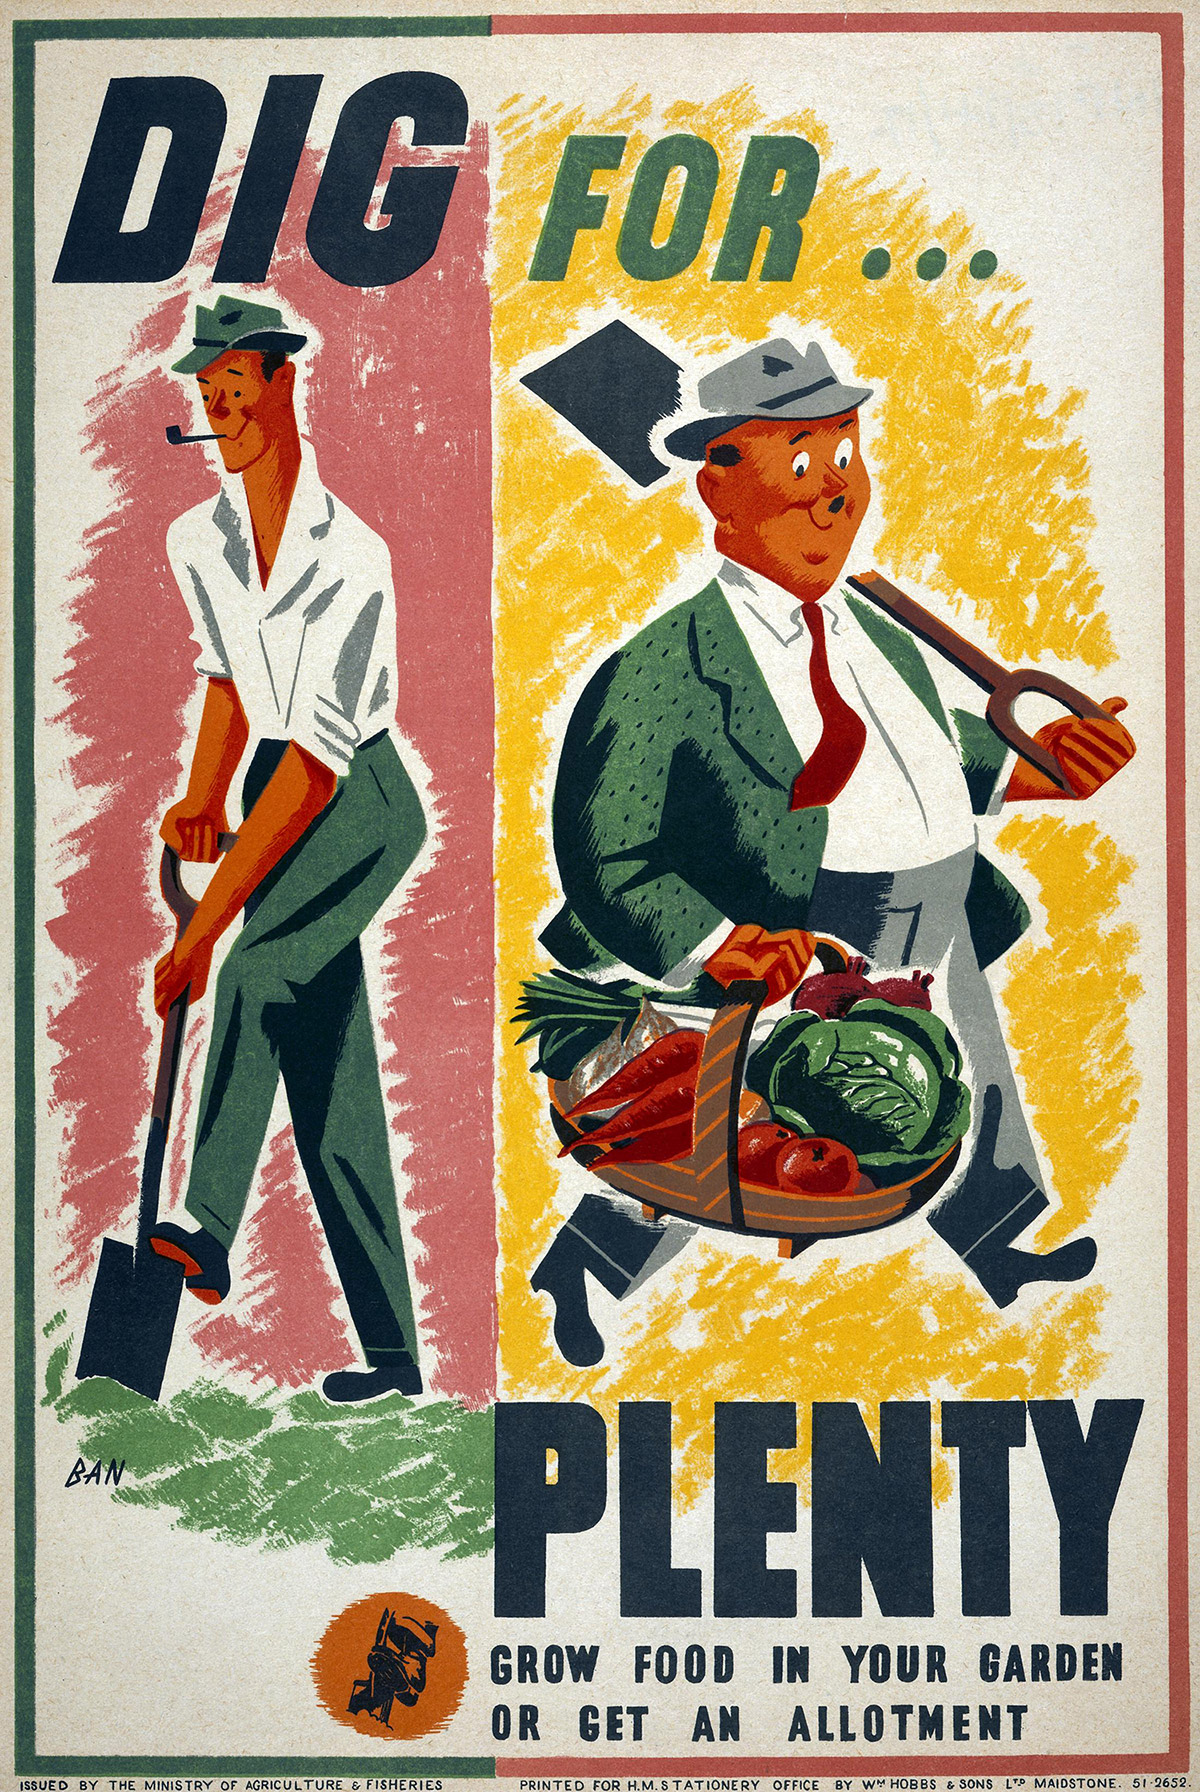 Poster featuring illustrations of two smiling men. One digs into the ground with a shovel and the other walks along holding a big basket of vegetables and a shovel over his shoulder.